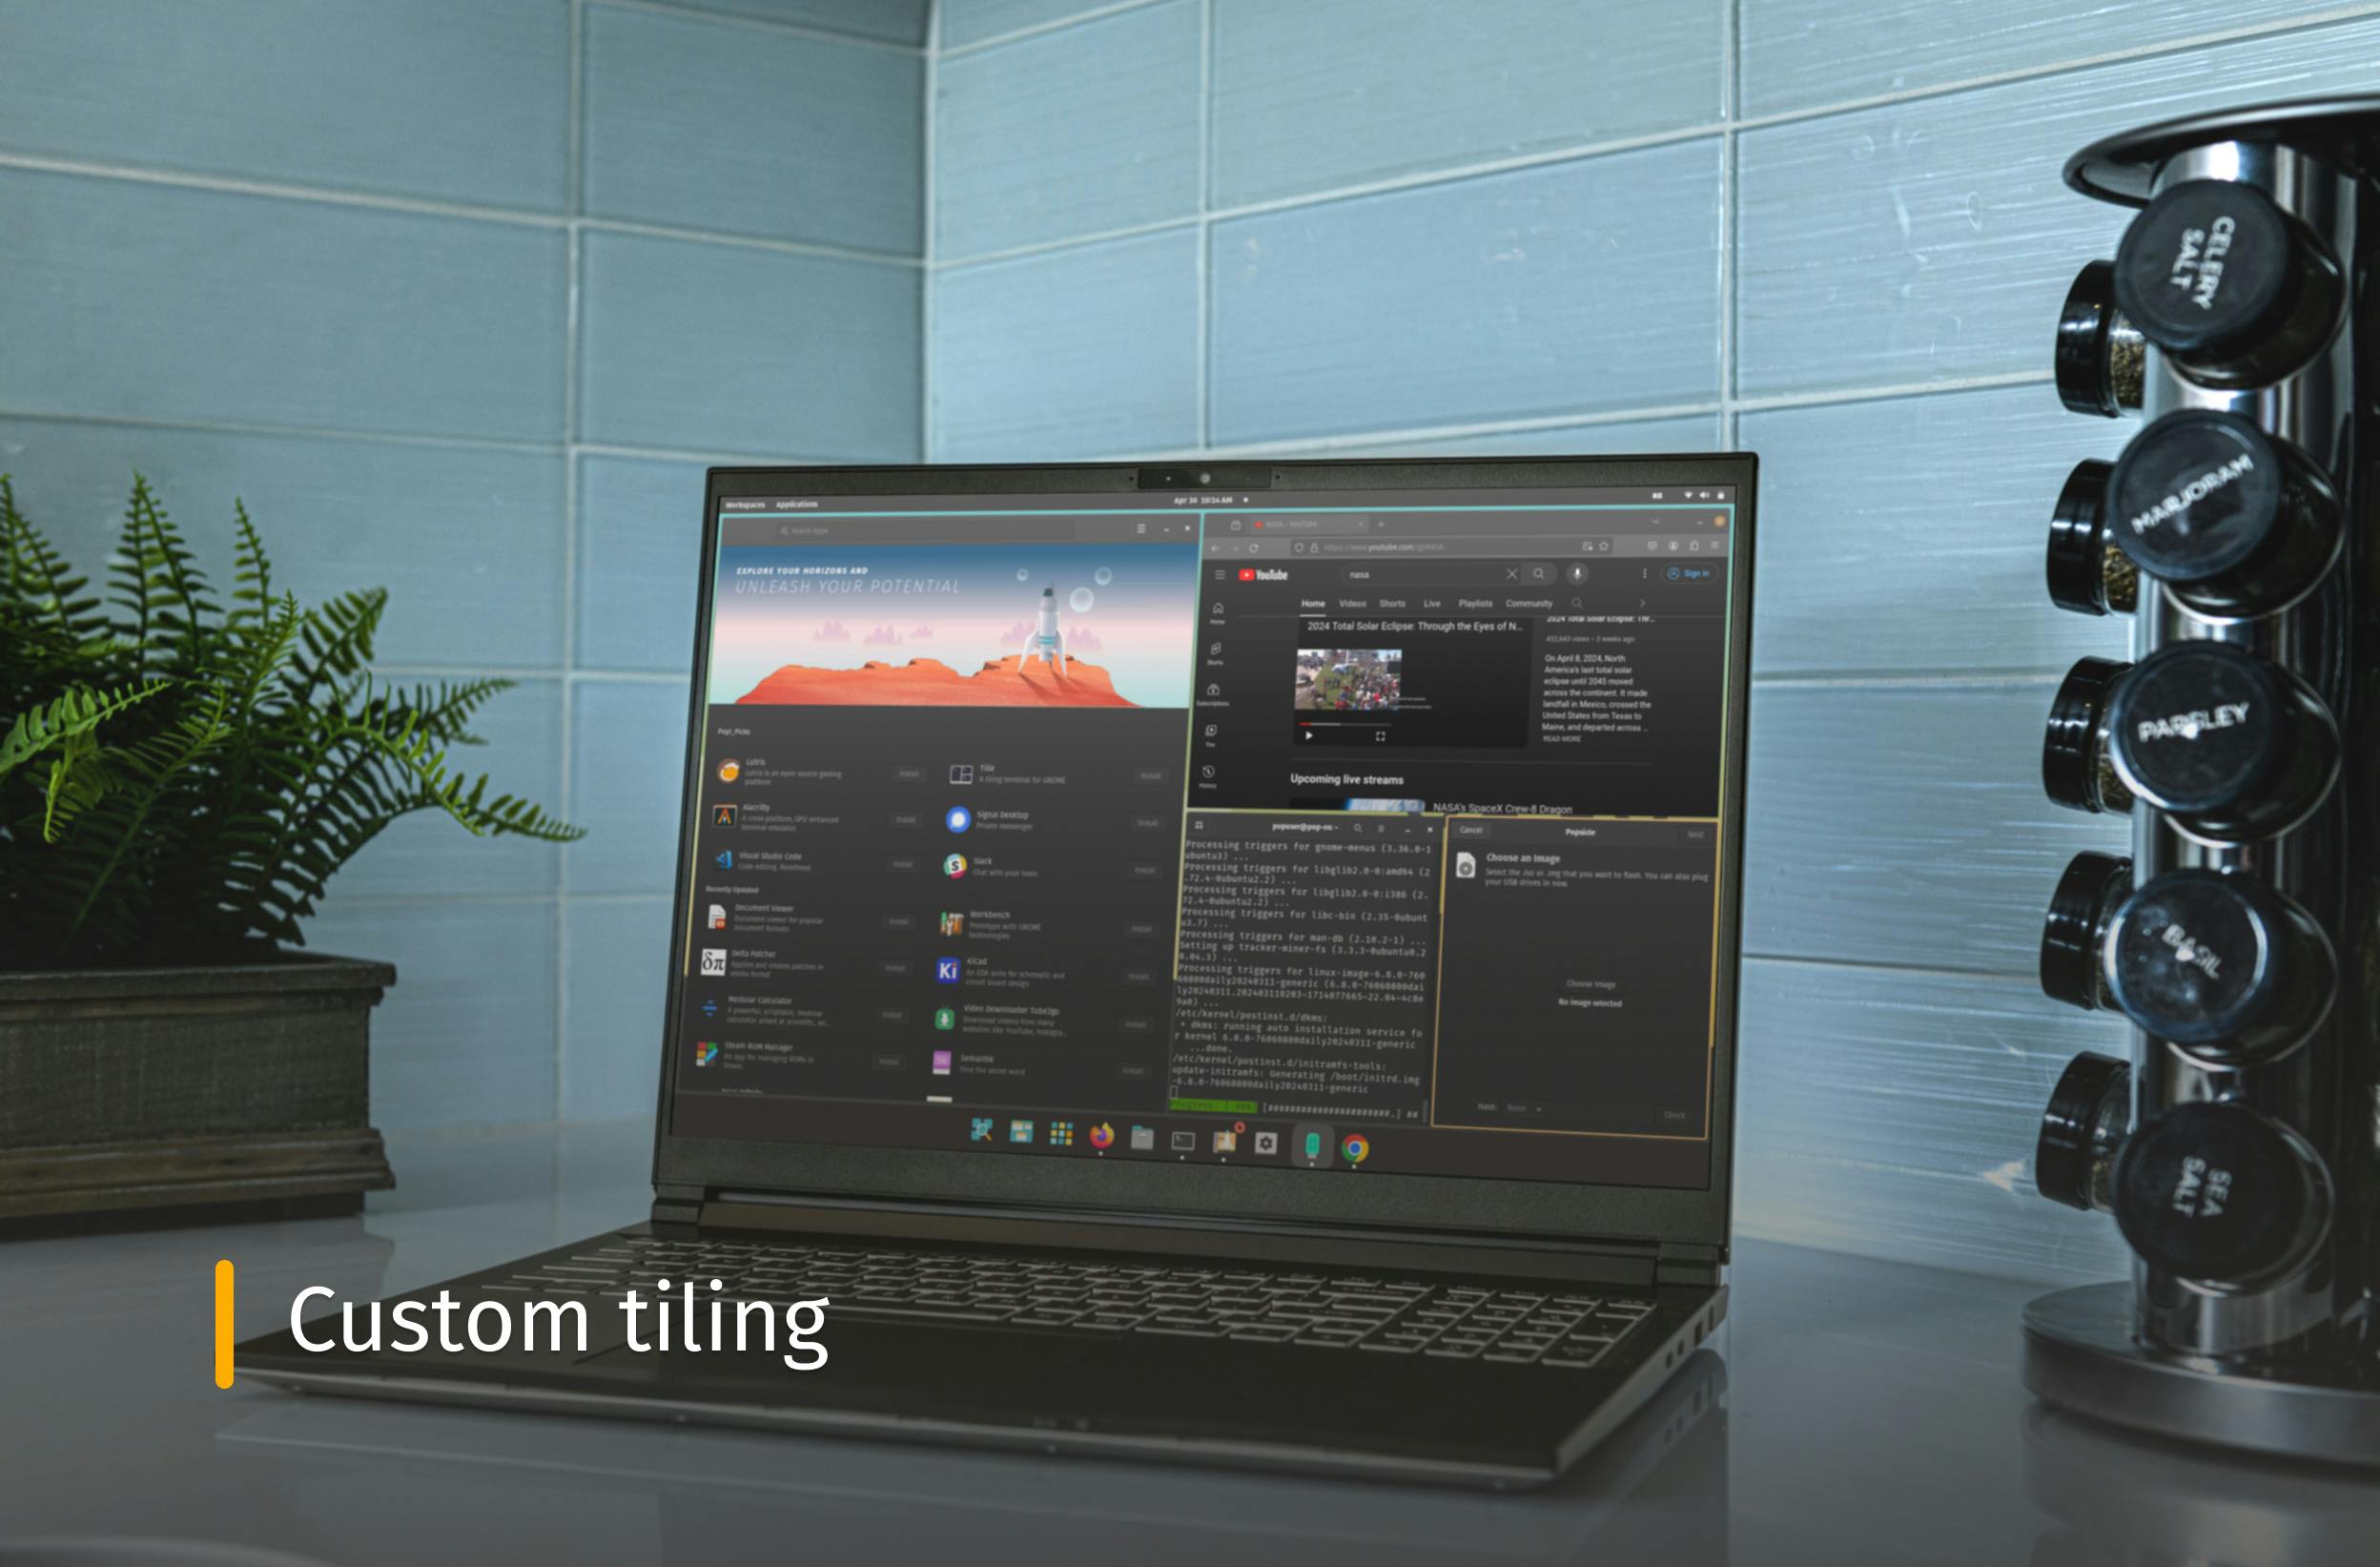 Darter Pro on a kitchen counter with blue tiles behind it and text that reads "Custom tiling"